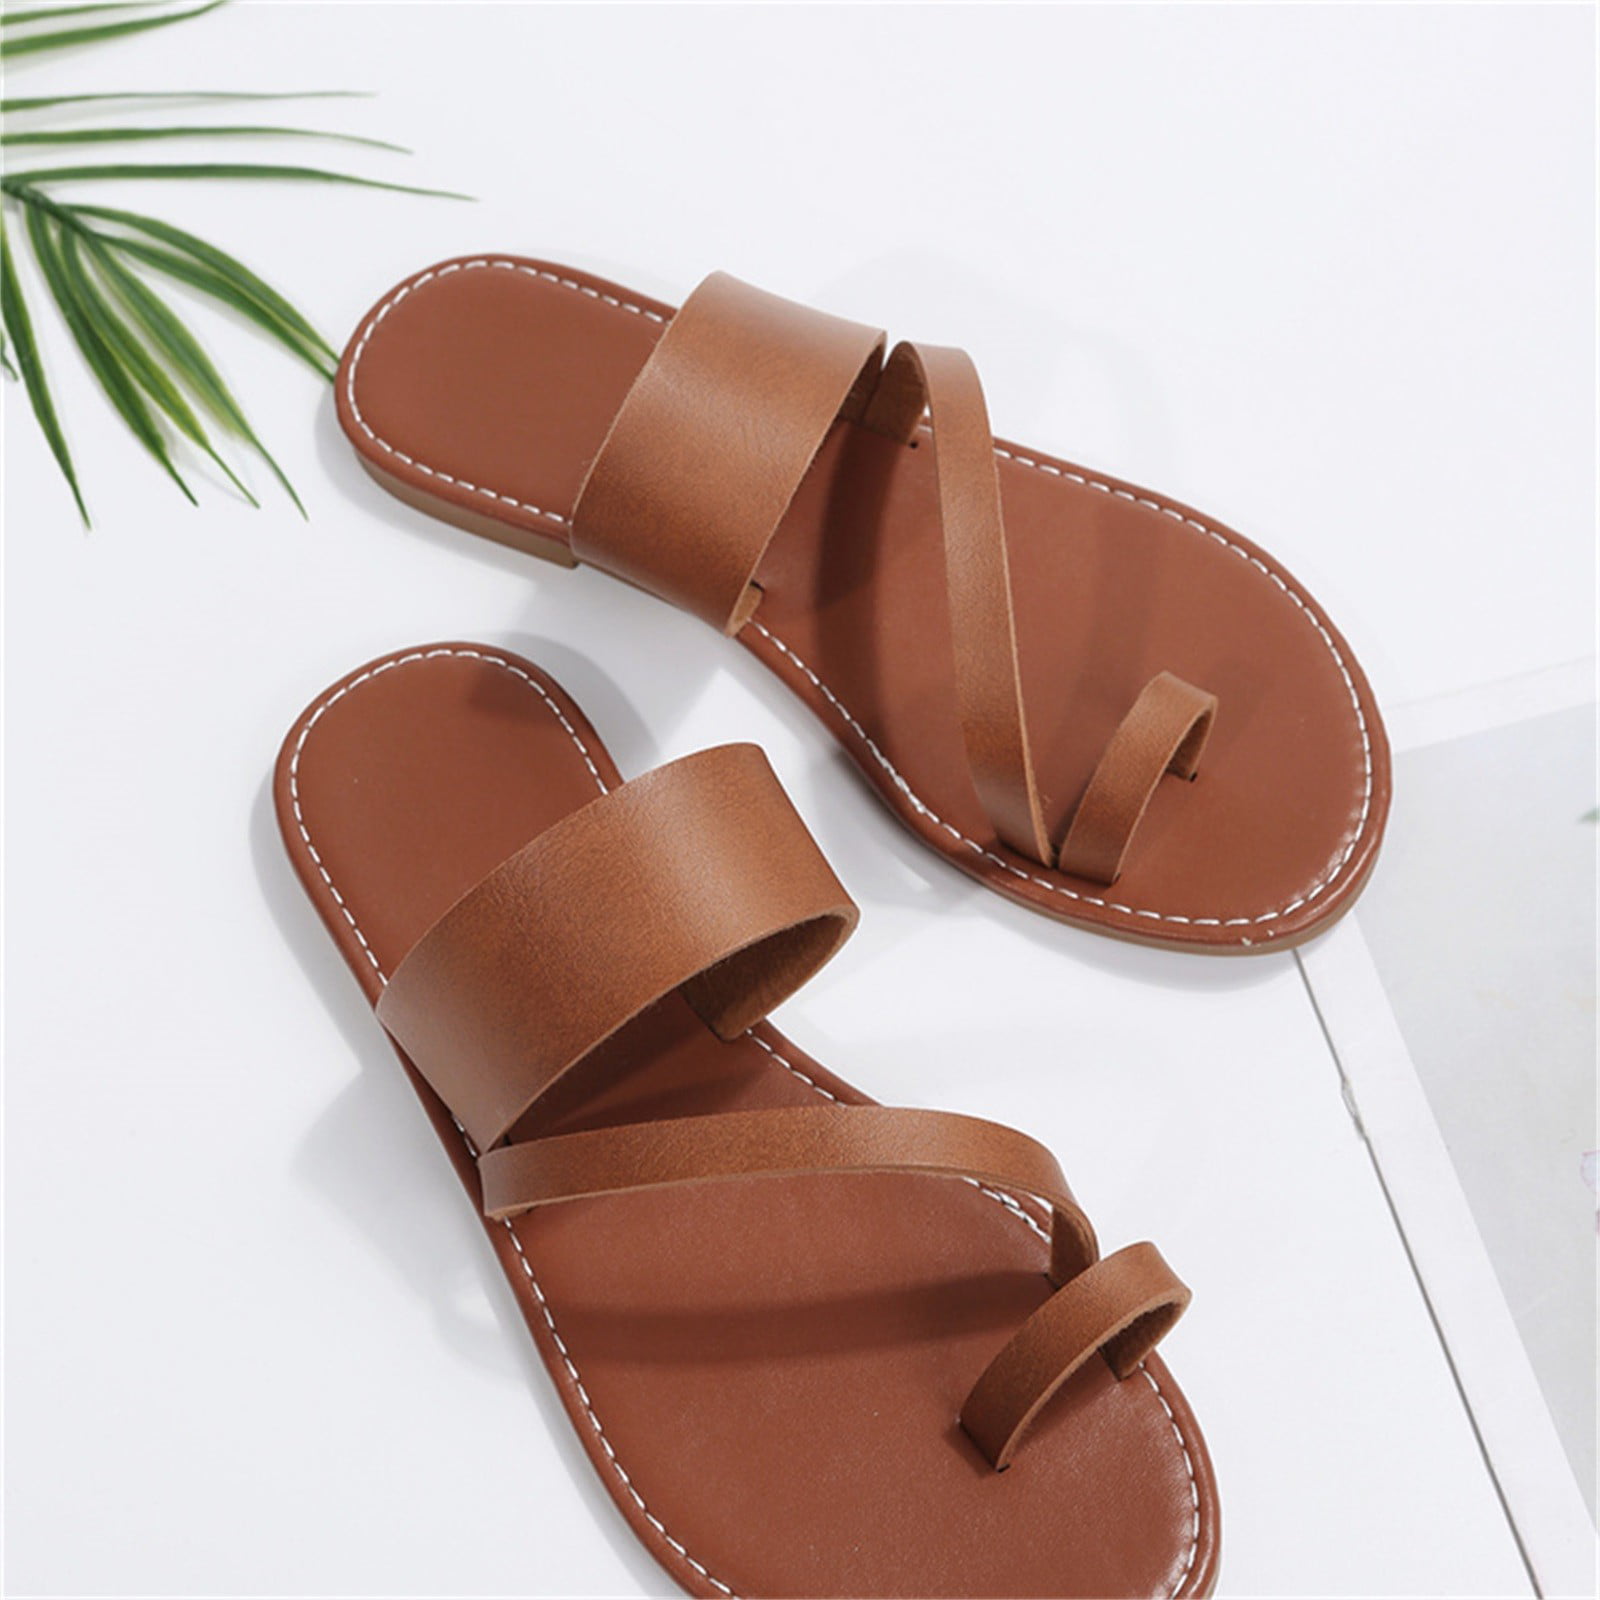  Cathalem deal of the day Sandals For Women Casual Dressy Summer  Flat Sandals Comfortable Open Toe Trendy Flip Flops Sandals With Zipper :  Sports & Outdoors